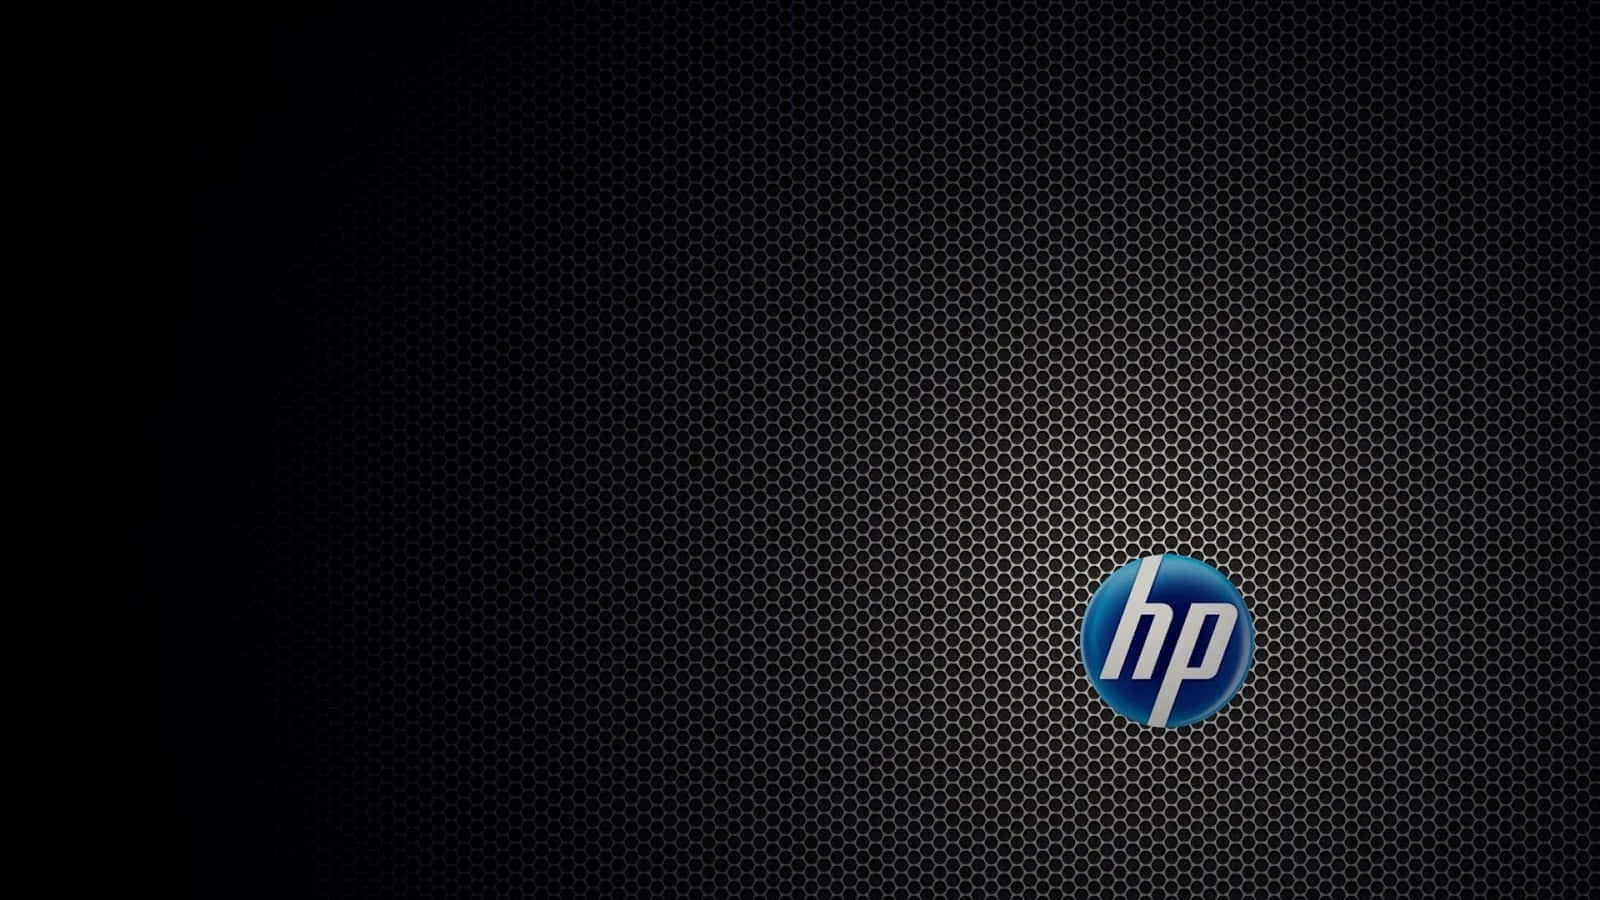 Unleash the power of HP